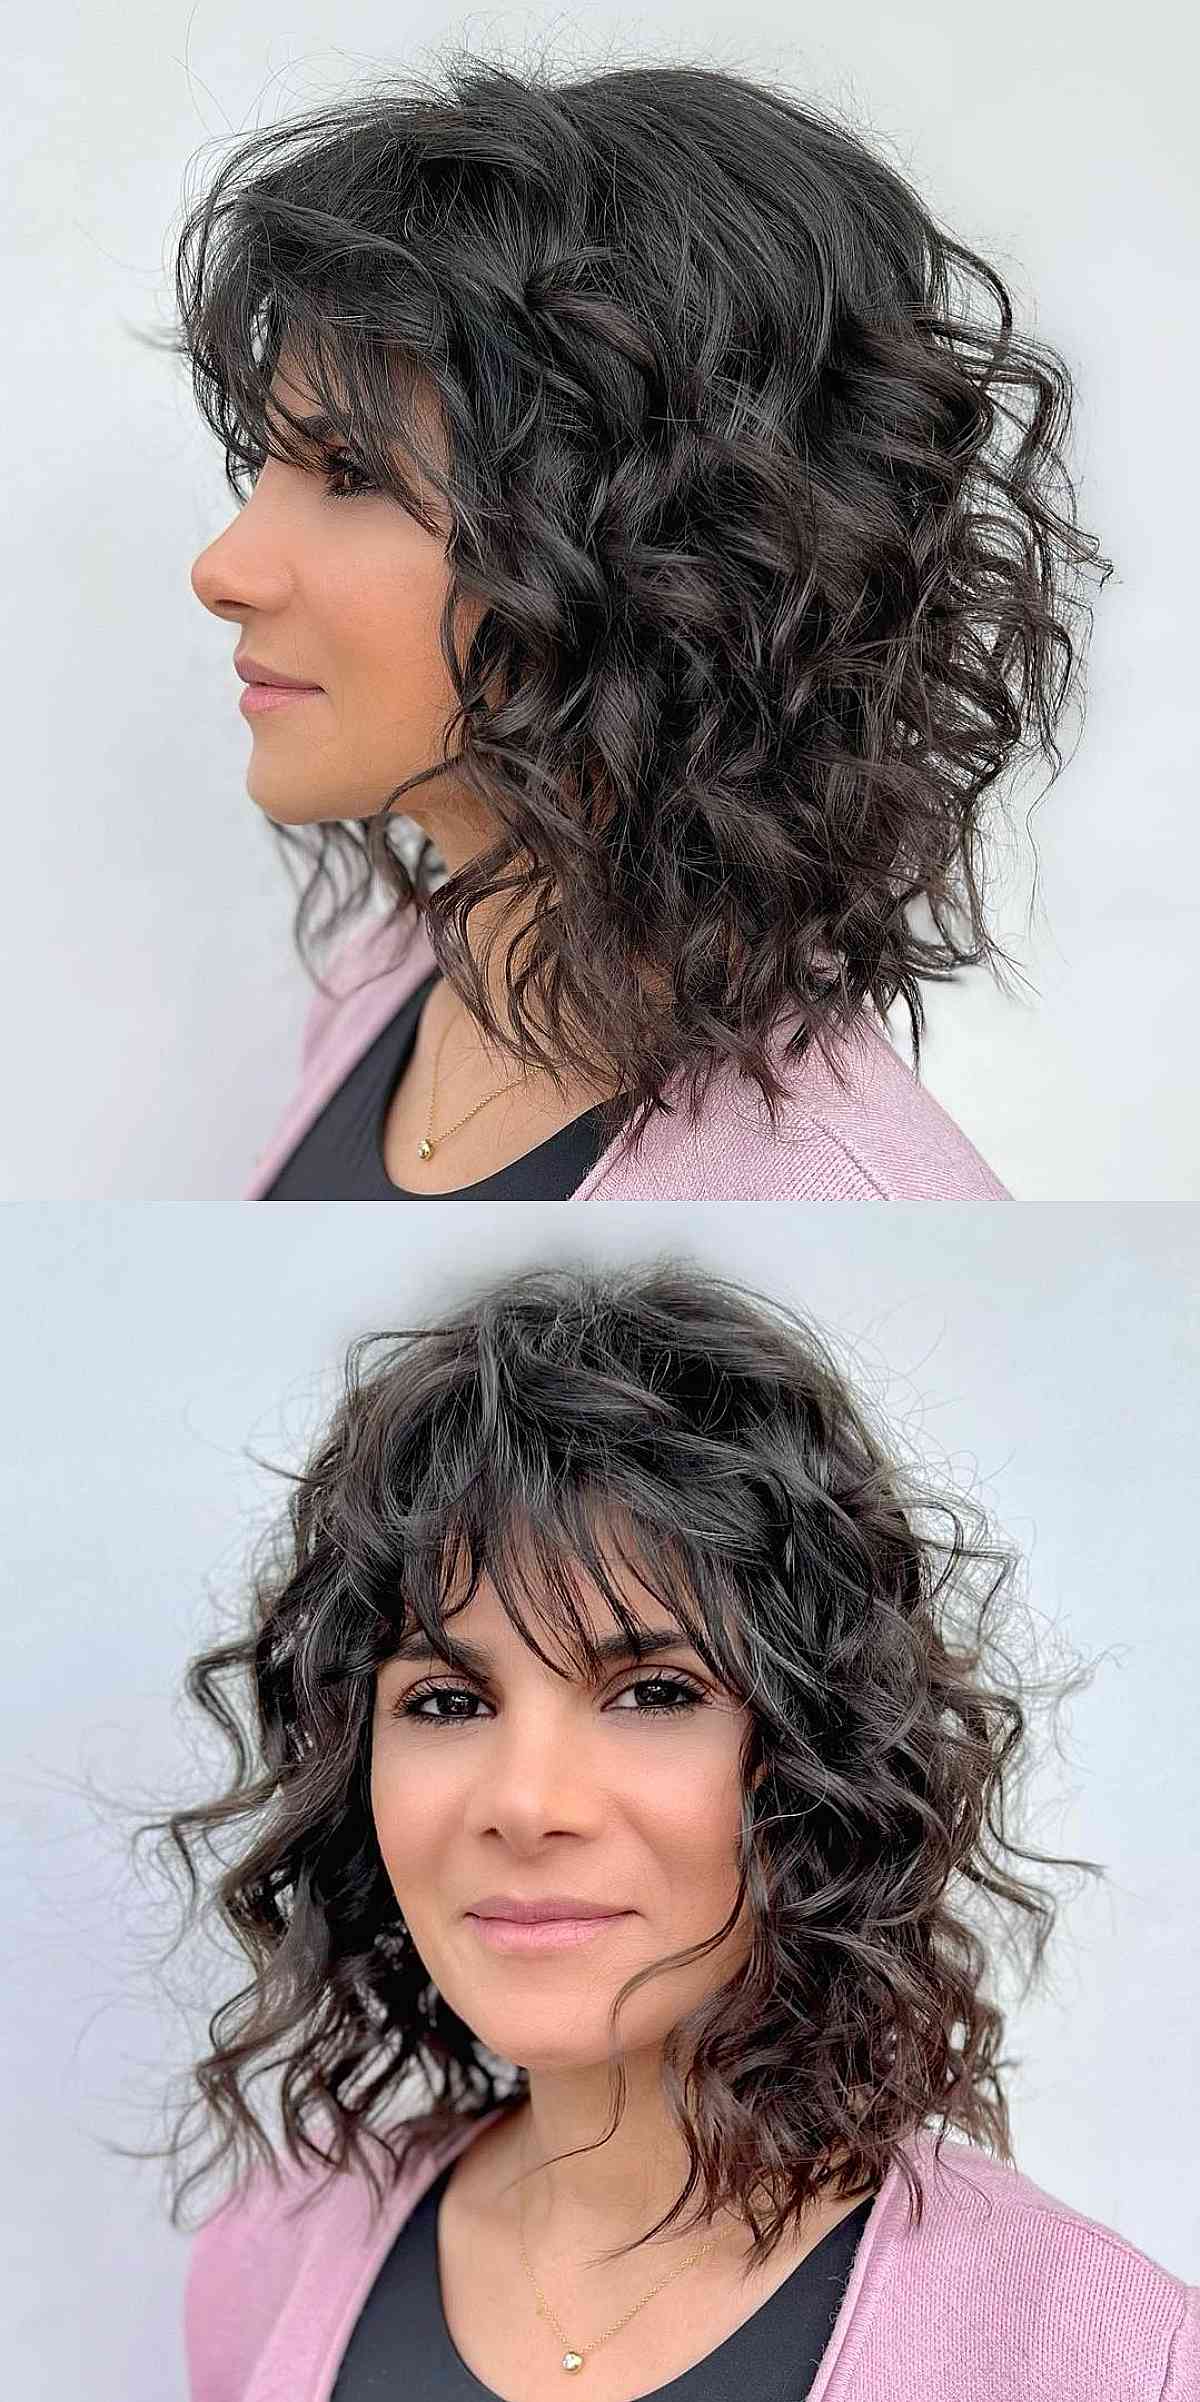 Perfectly layered curls with bangs